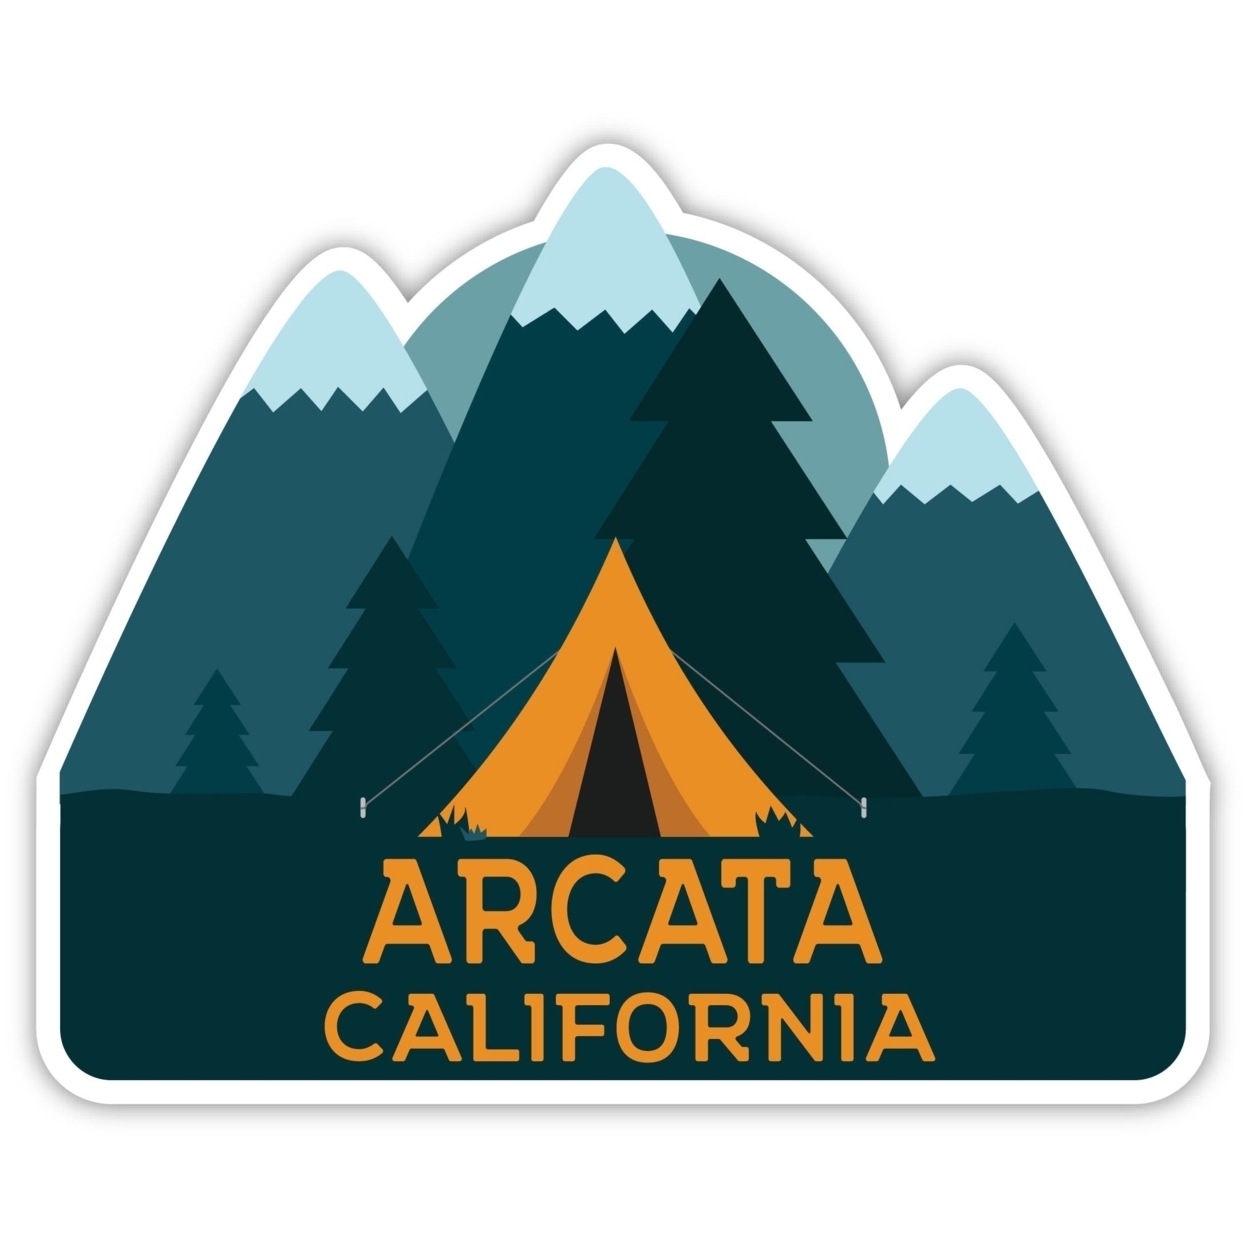 Arcata California Souvenir Decorative Stickers (Choose Theme And Size) - 4-Pack, 4-Inch, Tent